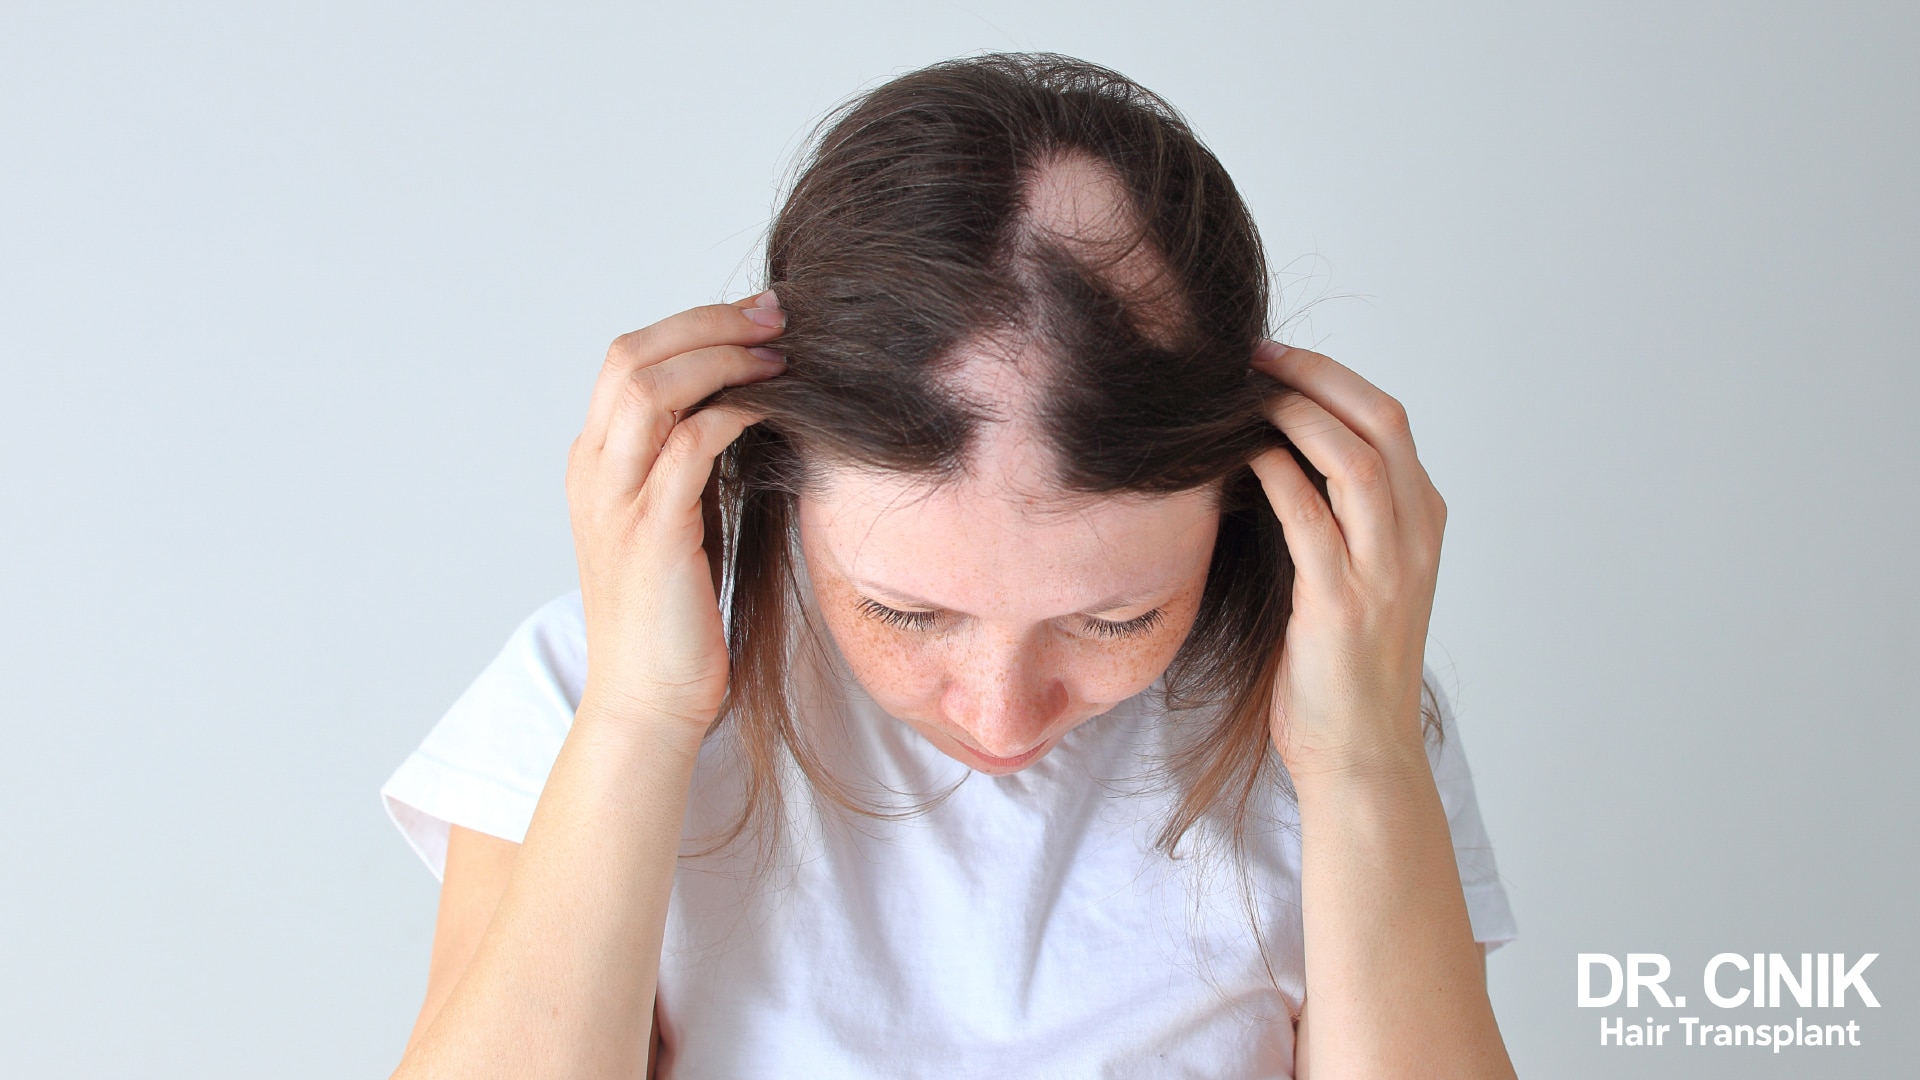 An advanced stage of androgenetic alopecia in women.